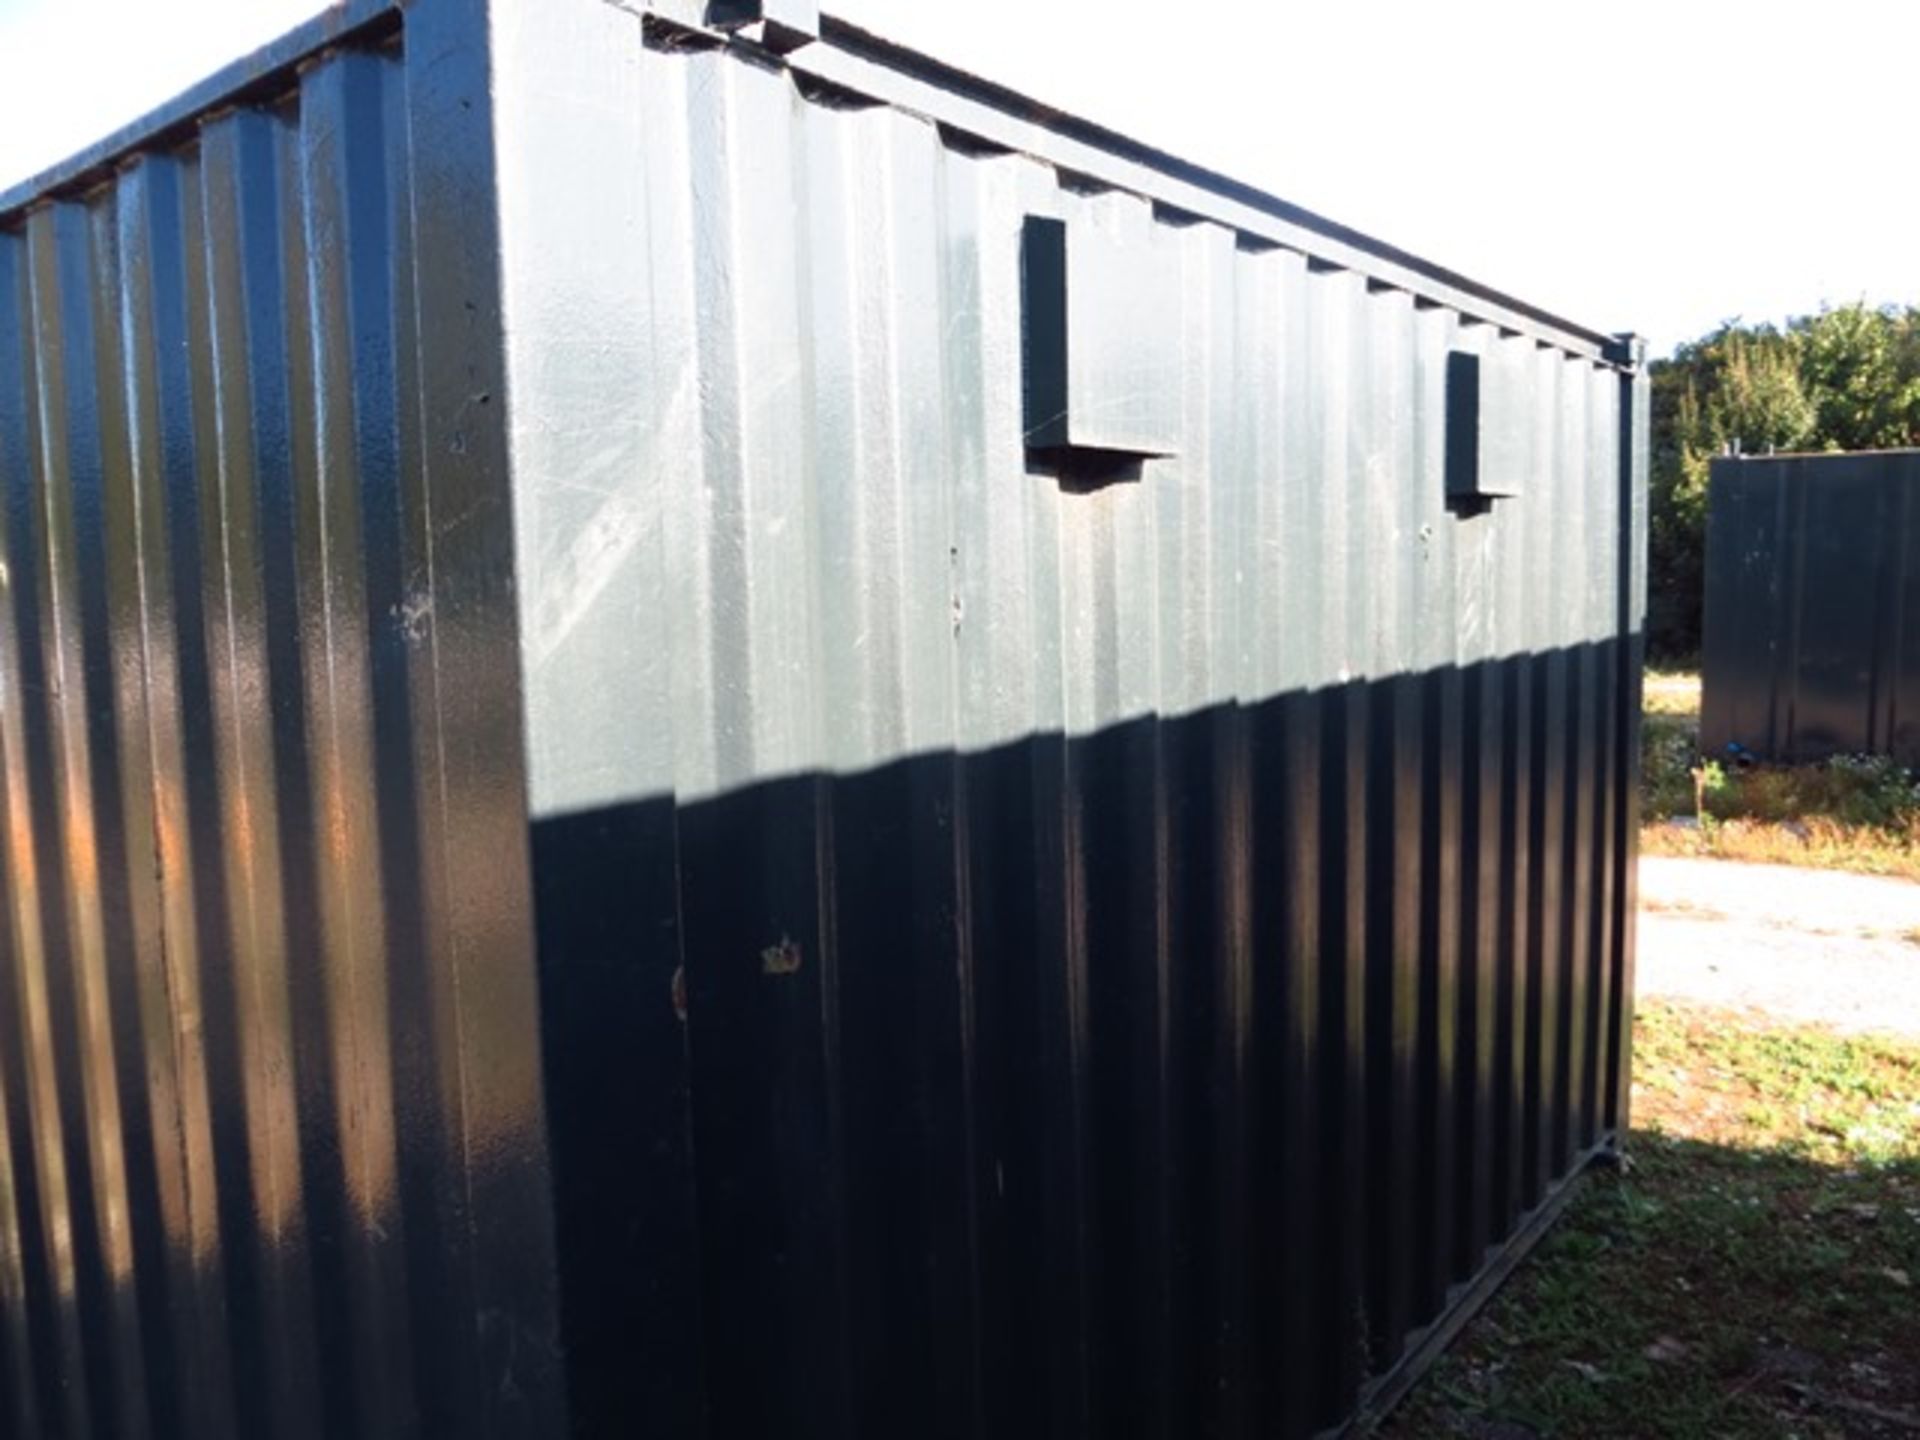 12' x 9' Steel Container Split WC 2 Cubicles & 2 Urinals c/w Separate Ladies Toilet Cubicle - Image 4 of 8